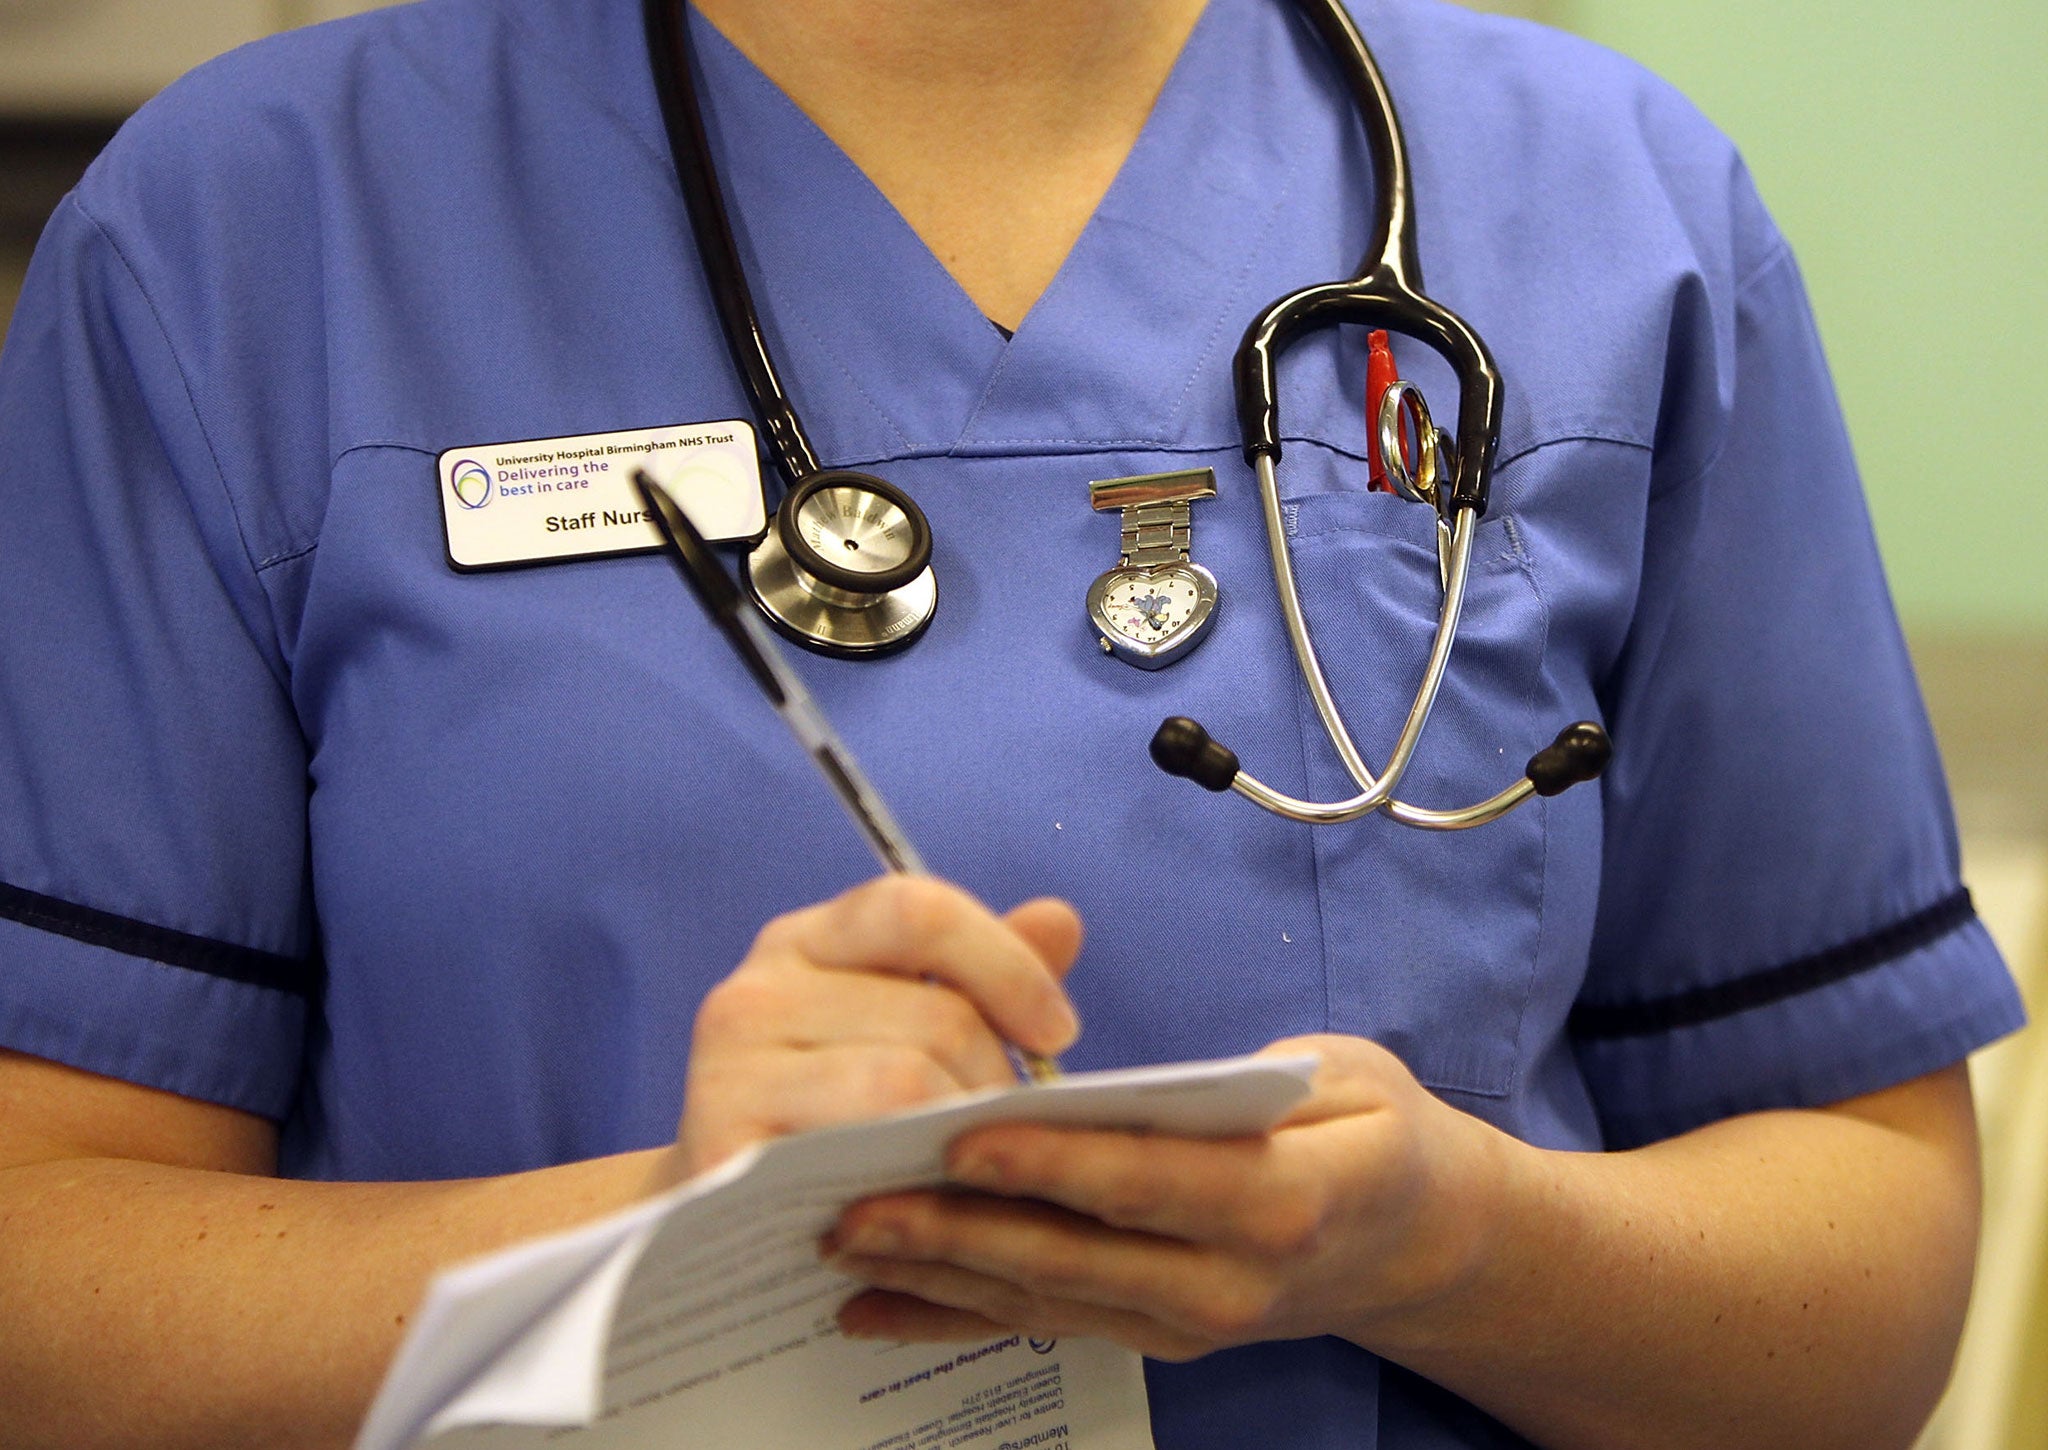 Nurses now being face struck off if they don't report poor care